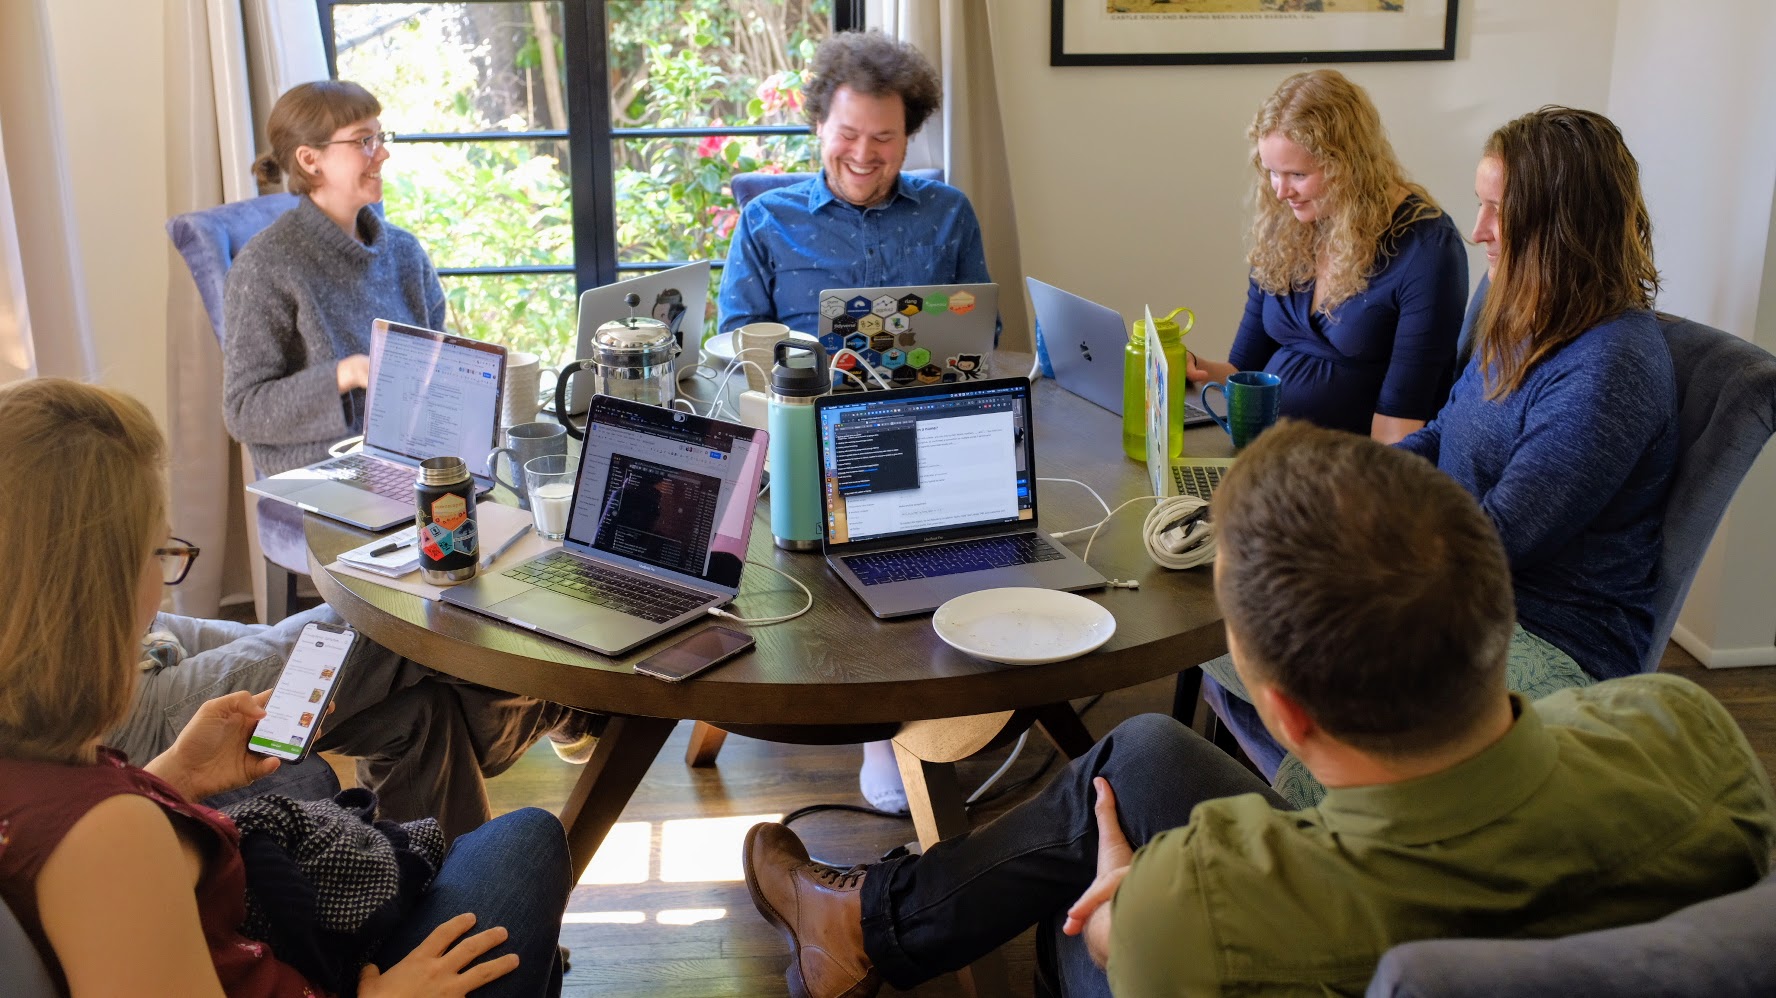 6 smiling people sit at a round table with their laptops open. Window in background